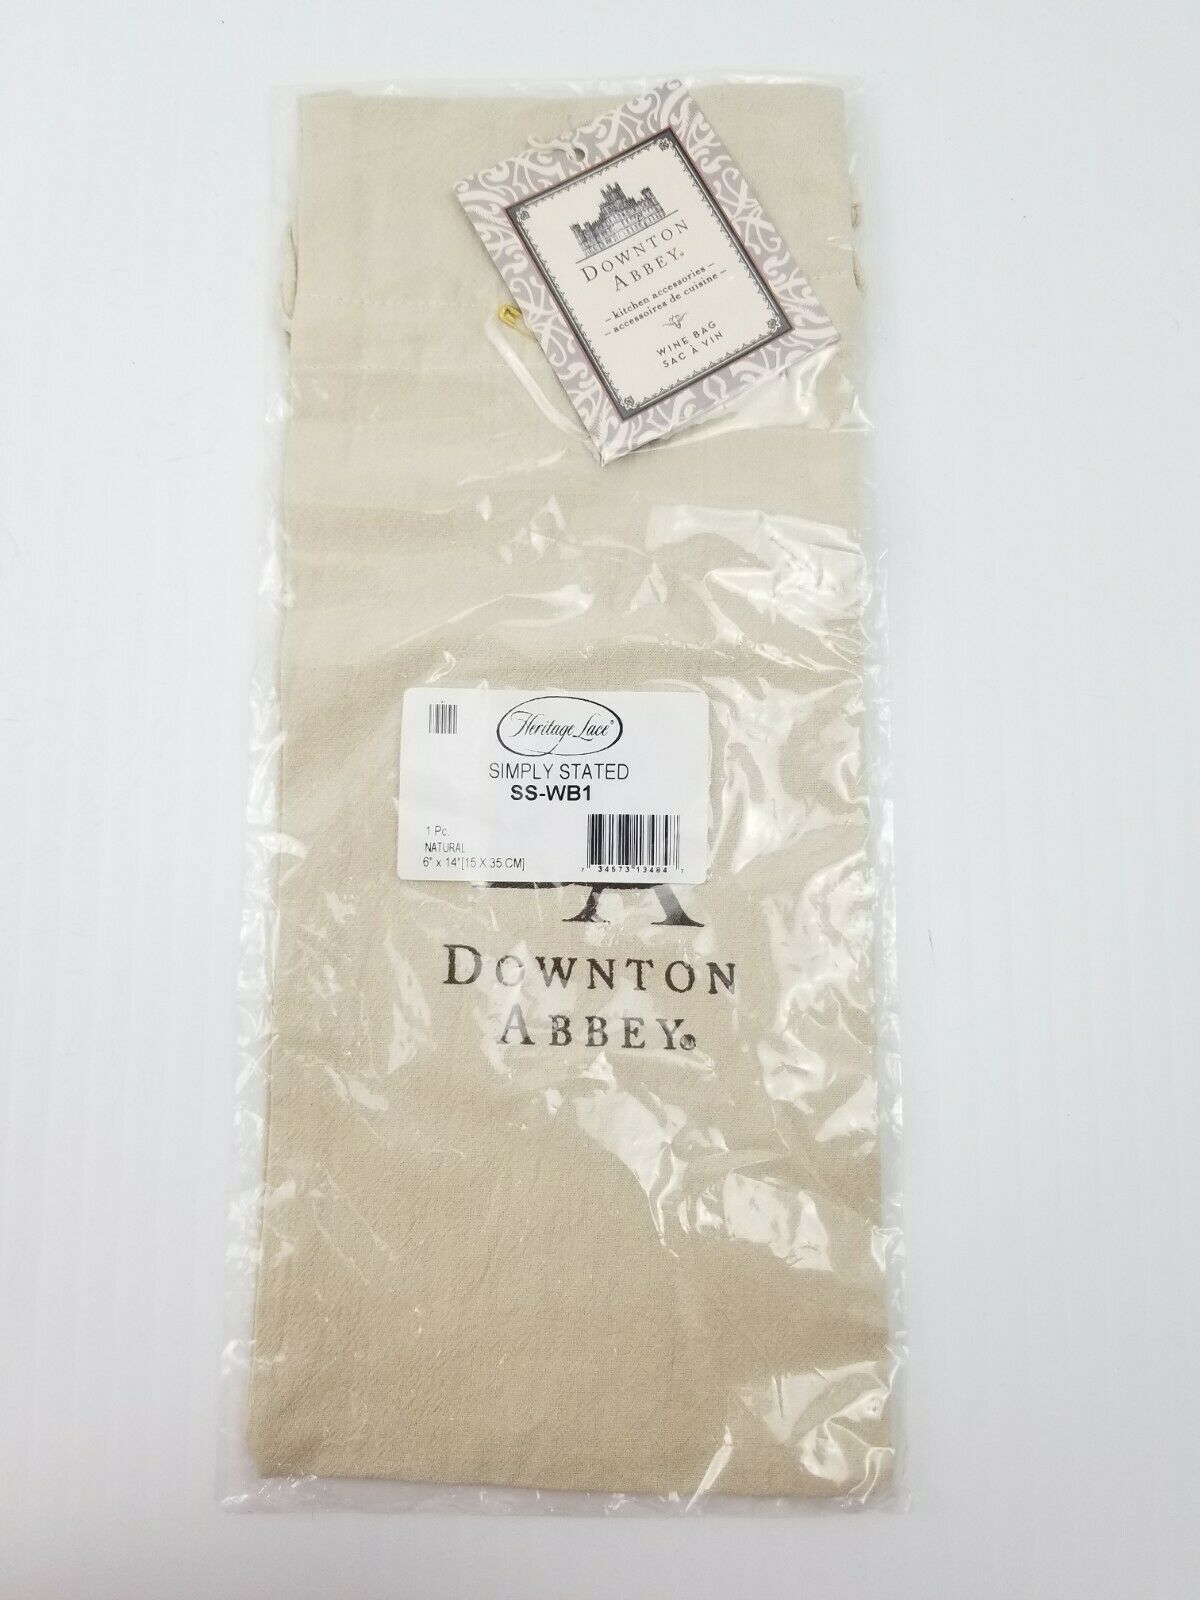 Heritage Lace Downton Abbey Wine Bag 6"×14" Natural Color Brand New Sealed - $13.85